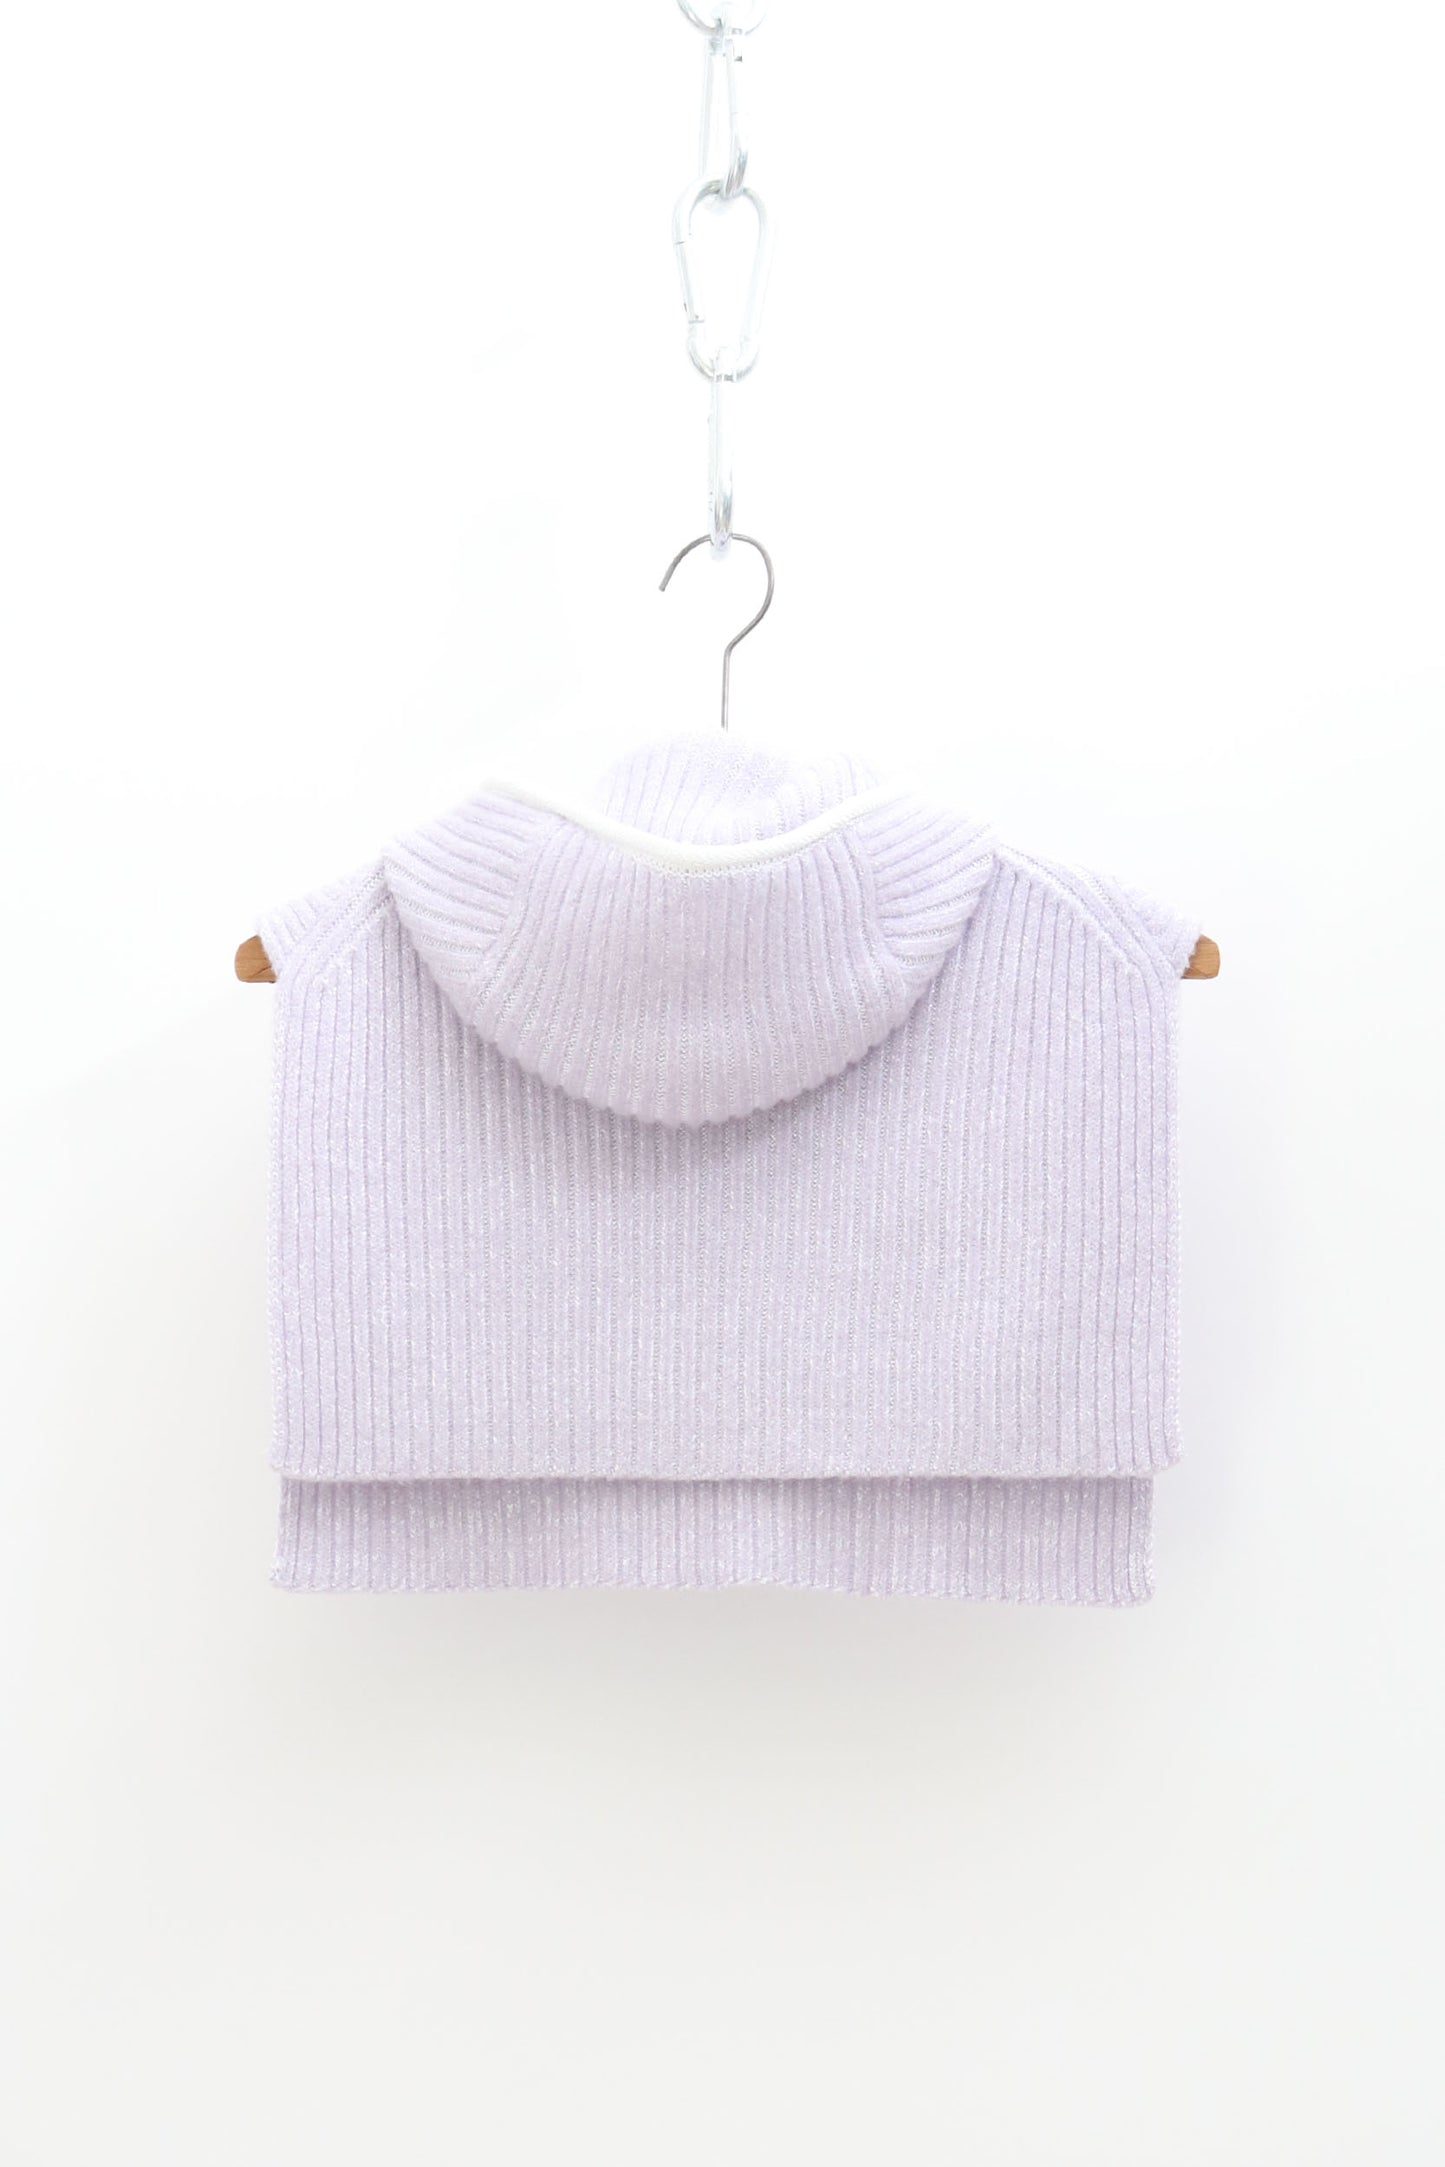 Cos Knitted Bib with Hood